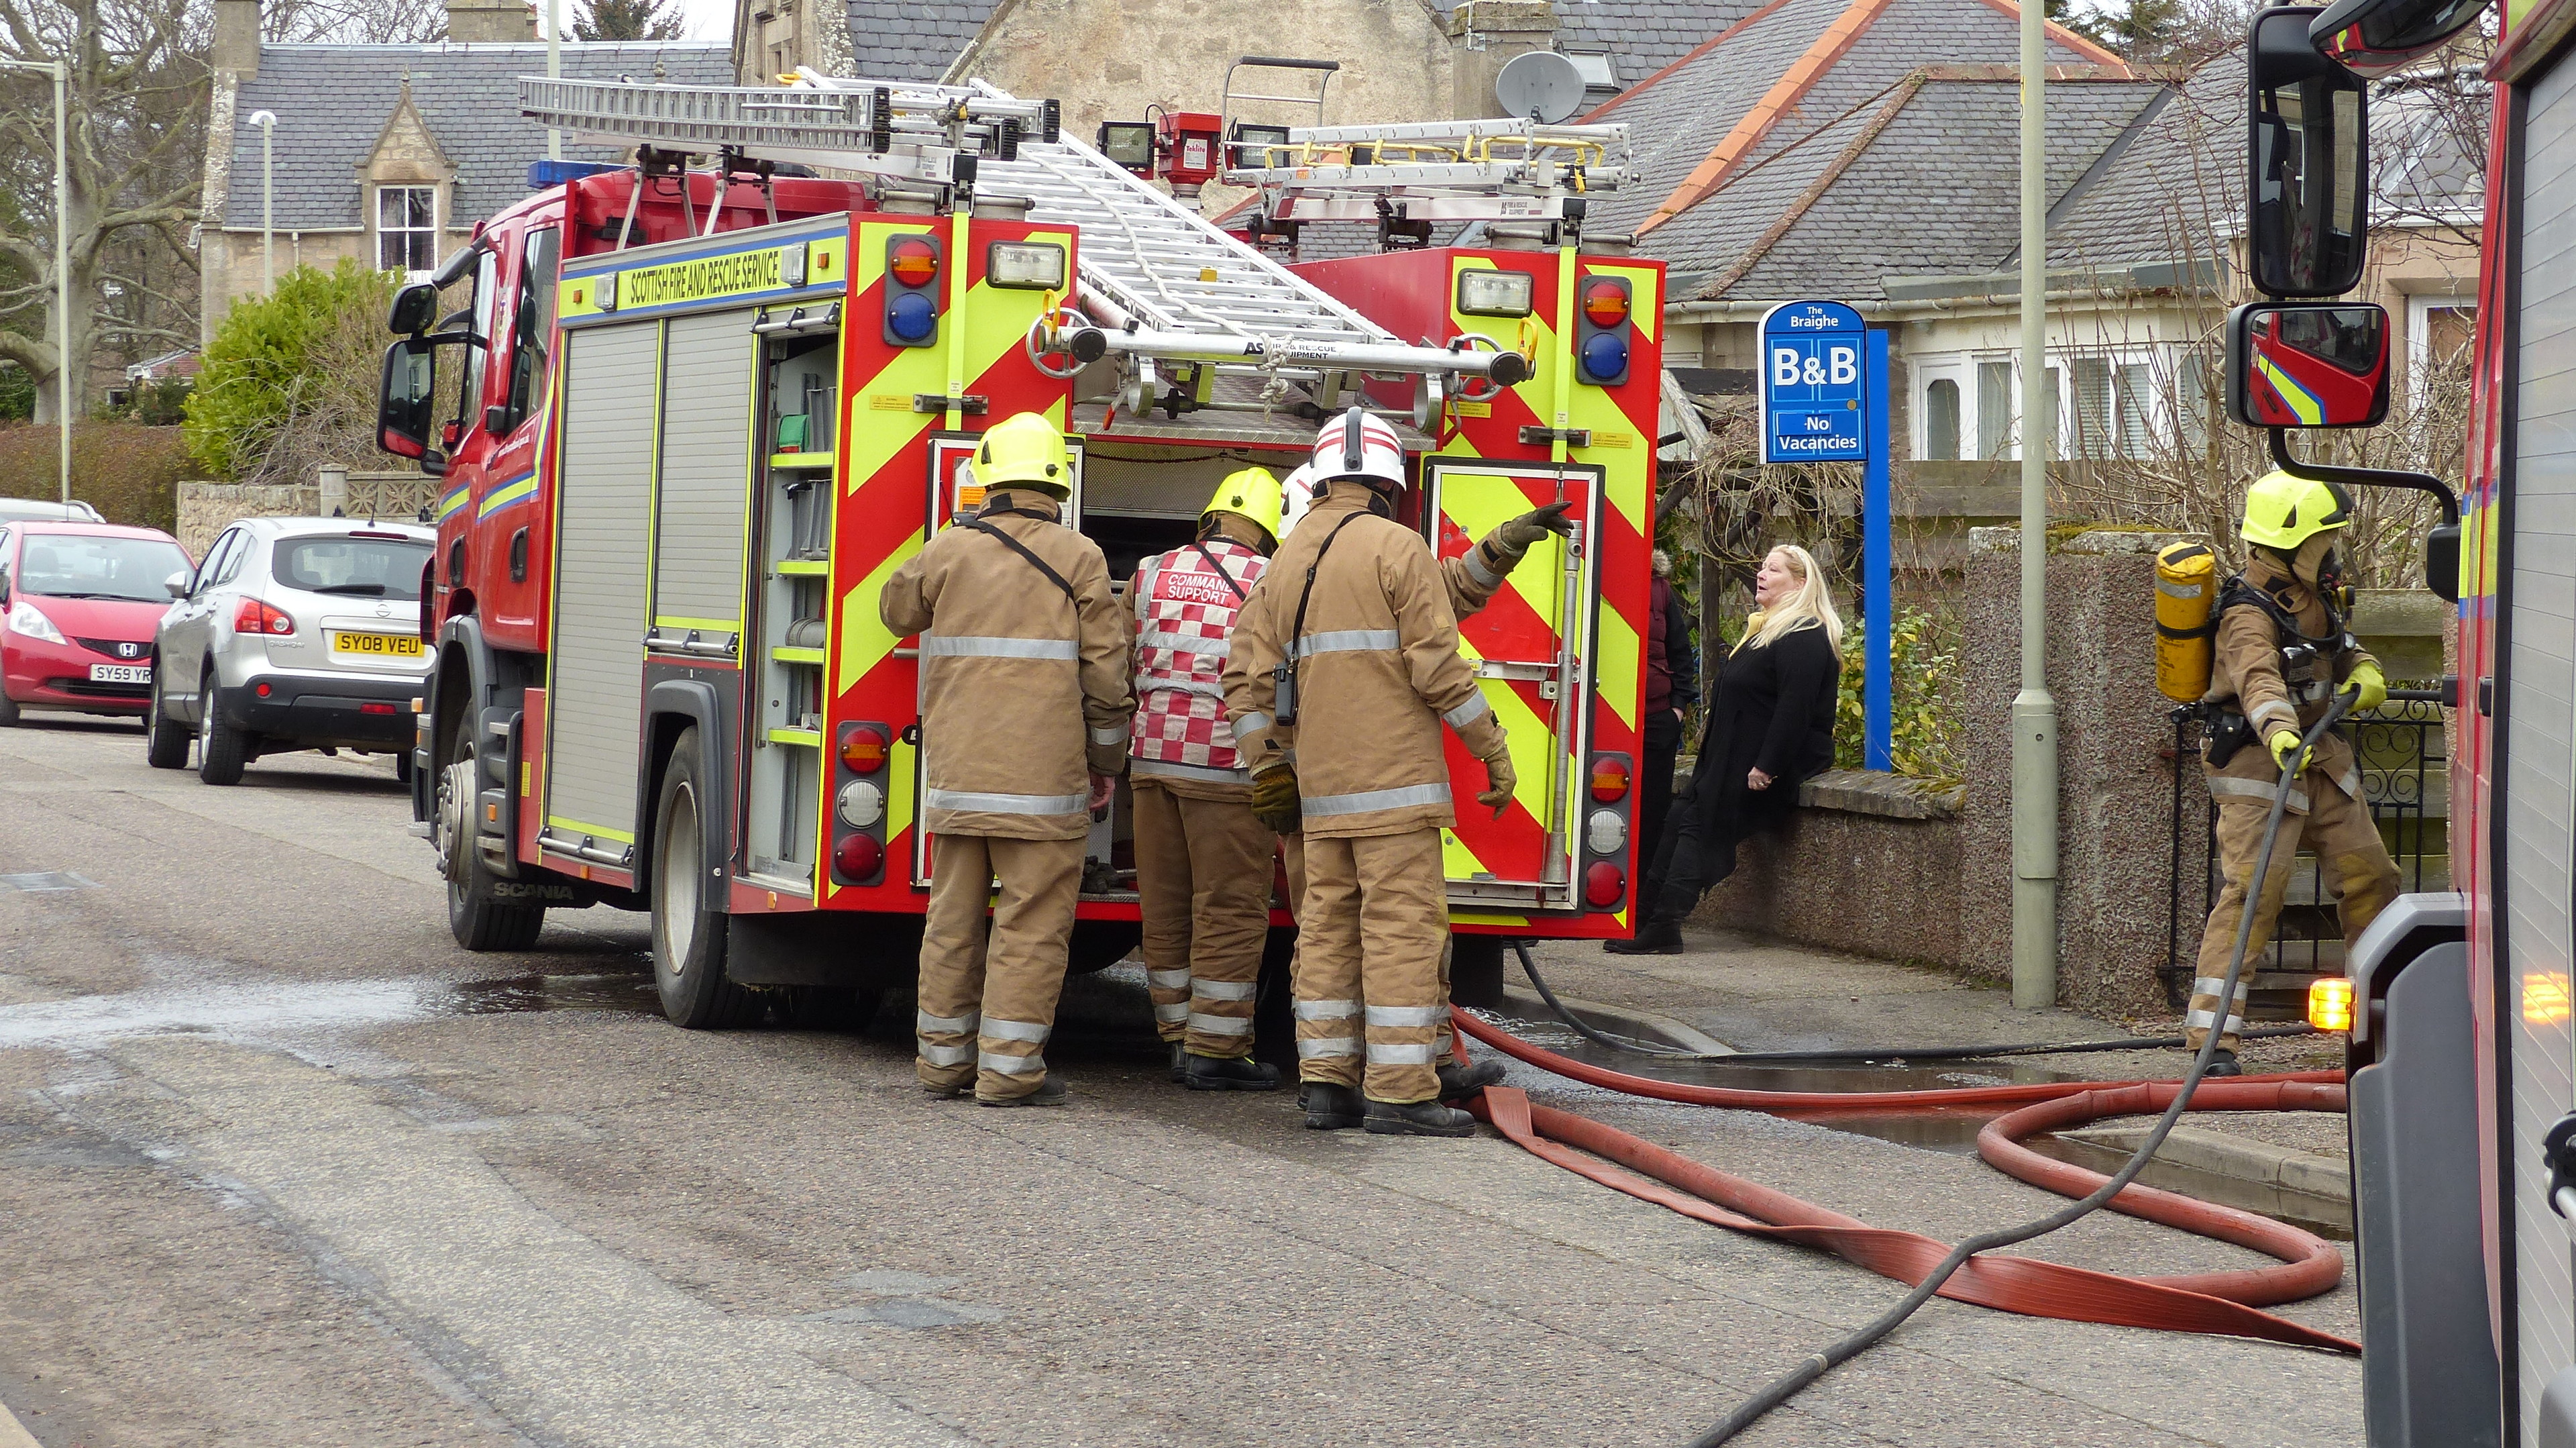 Fire crews are currently attending to the blaze in Nairn